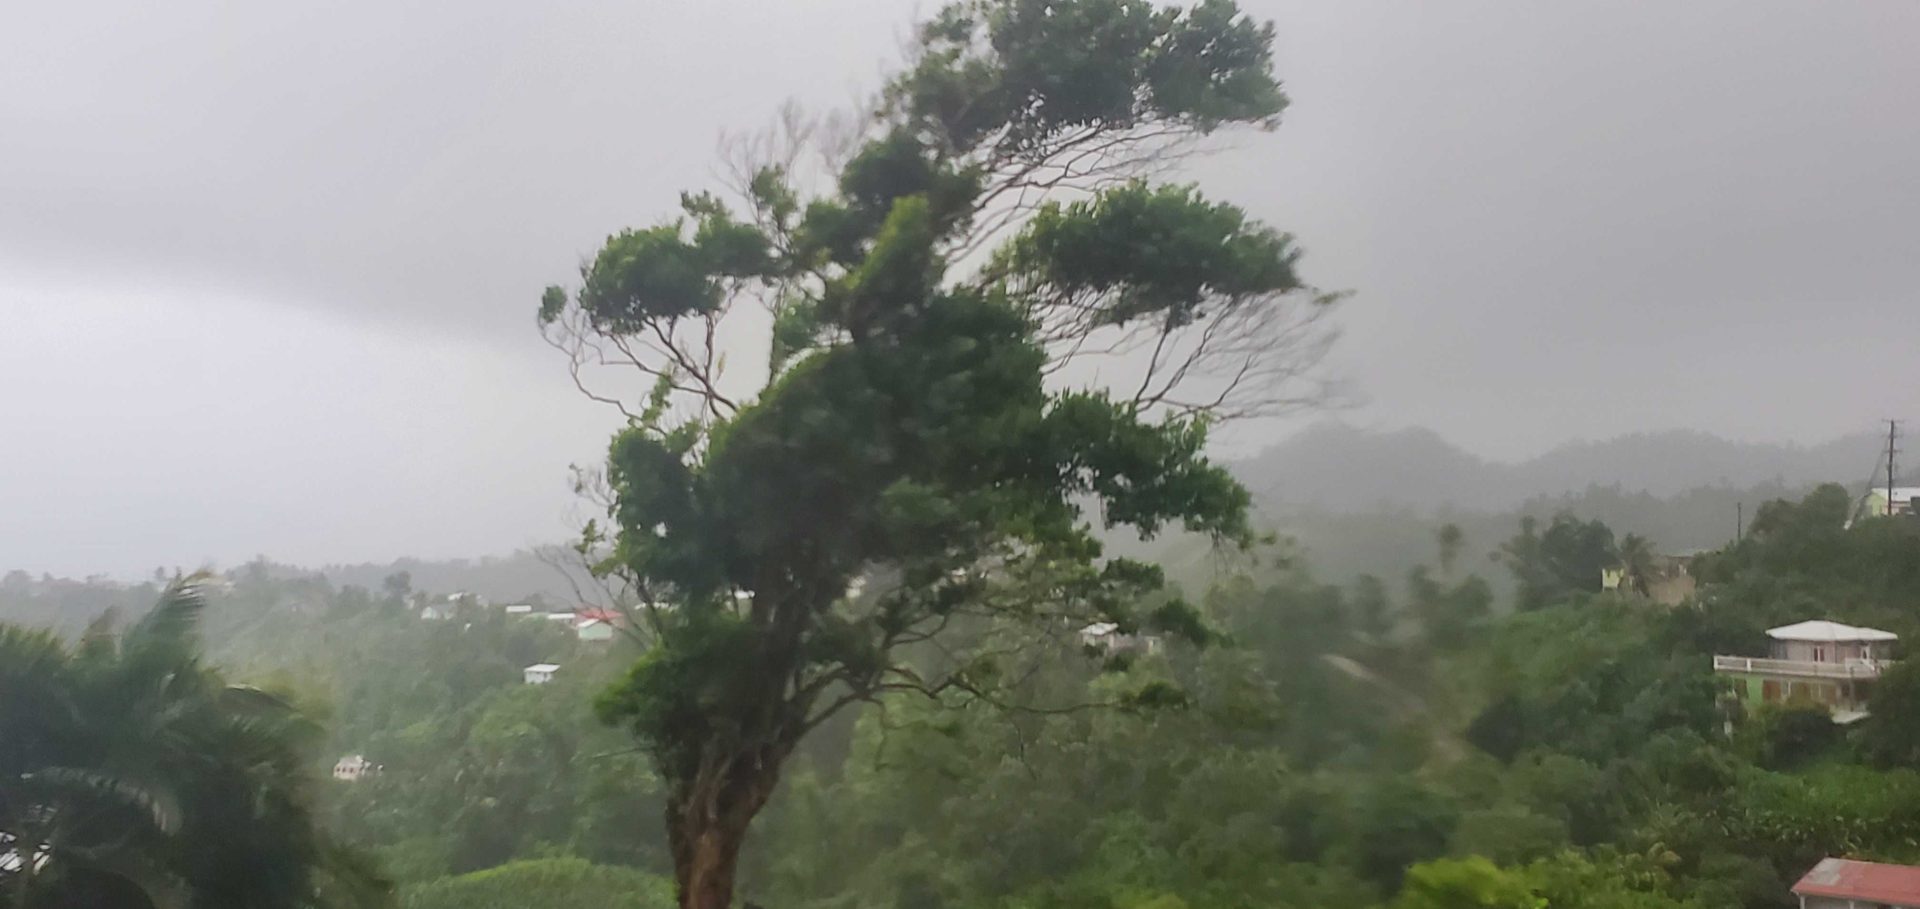 WEATHER UPDATE: A FLOOD WATCH IS IN EFFECT FOR DOMINICA UNTIL 2PM SUNDAY 30th AUGUST, 2020